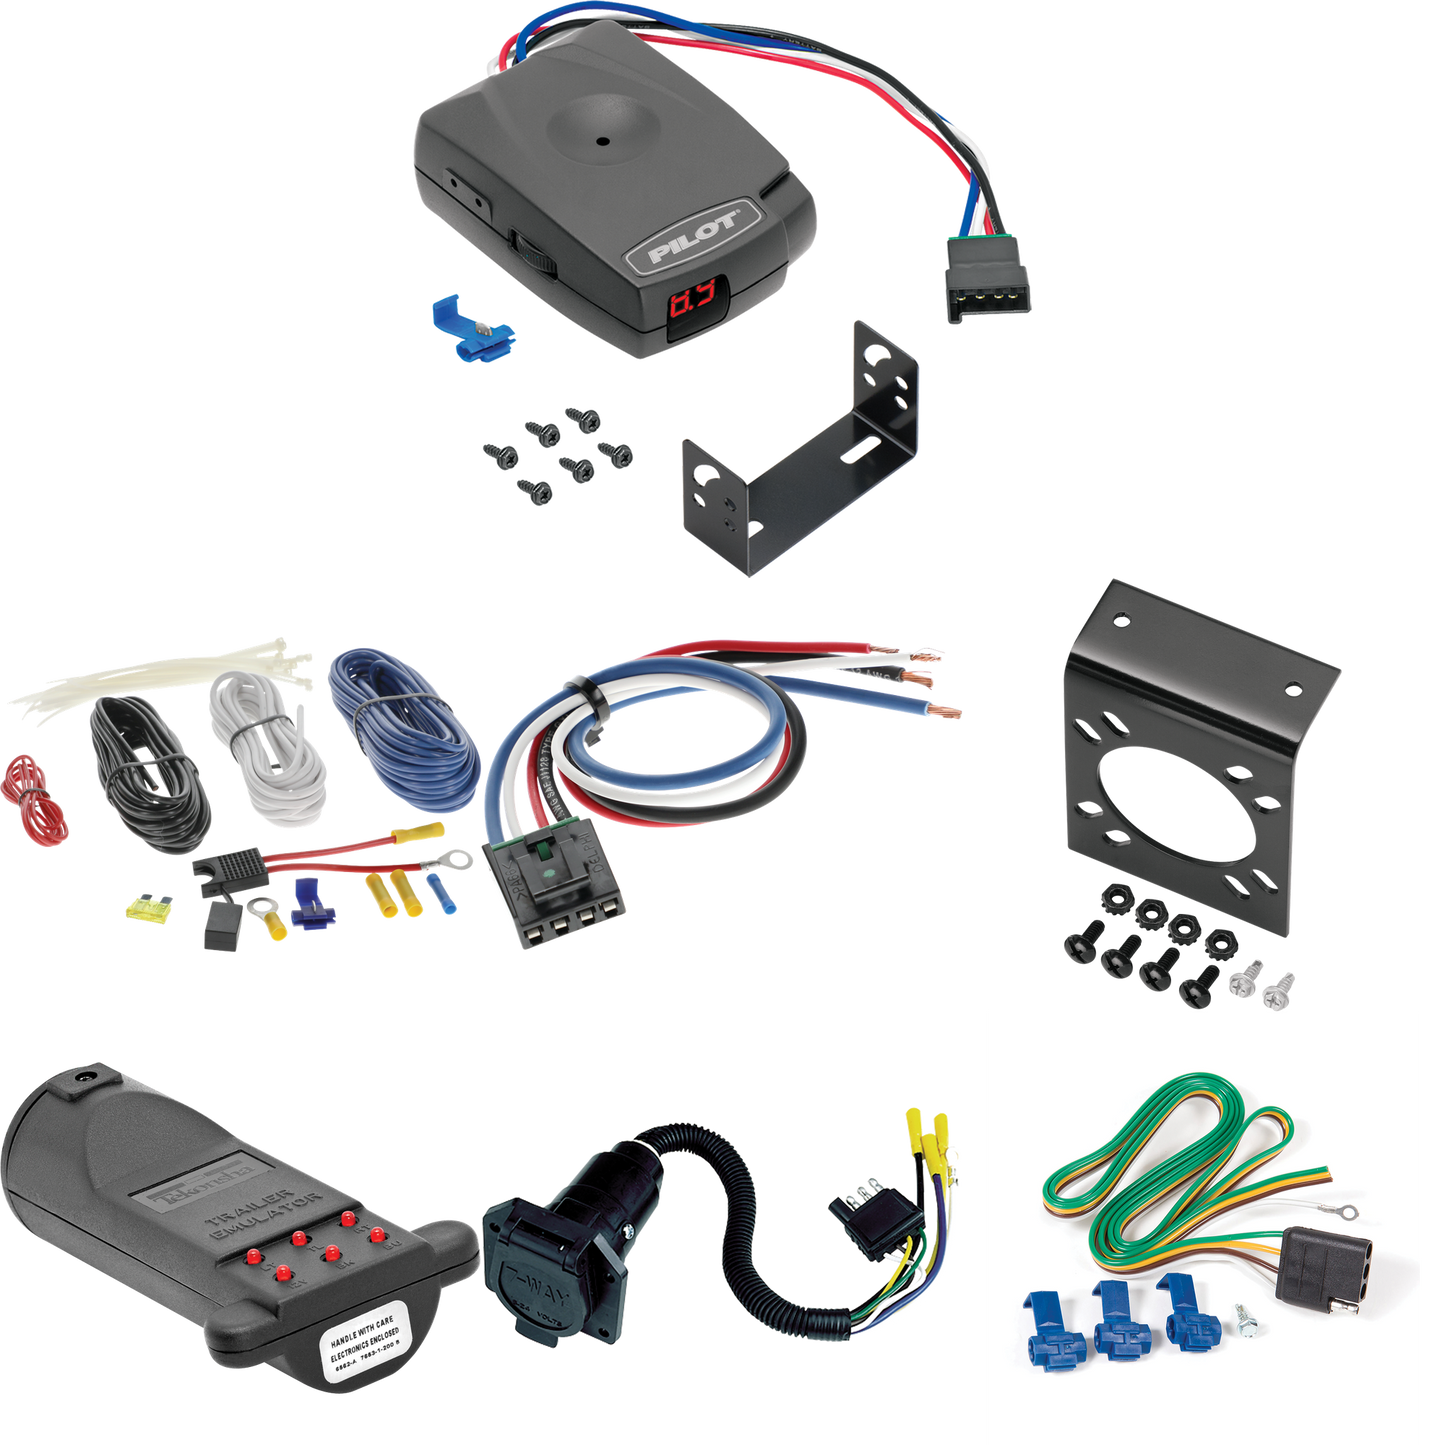 Fits 1983-1991 Ford LTD Crown Victoria 7-Way RV Wiring + Pro Series Pilot Brake Control + Generic BC Wiring Adapter + 7-Way Tester and Trailer Emulator By Reese Towpower